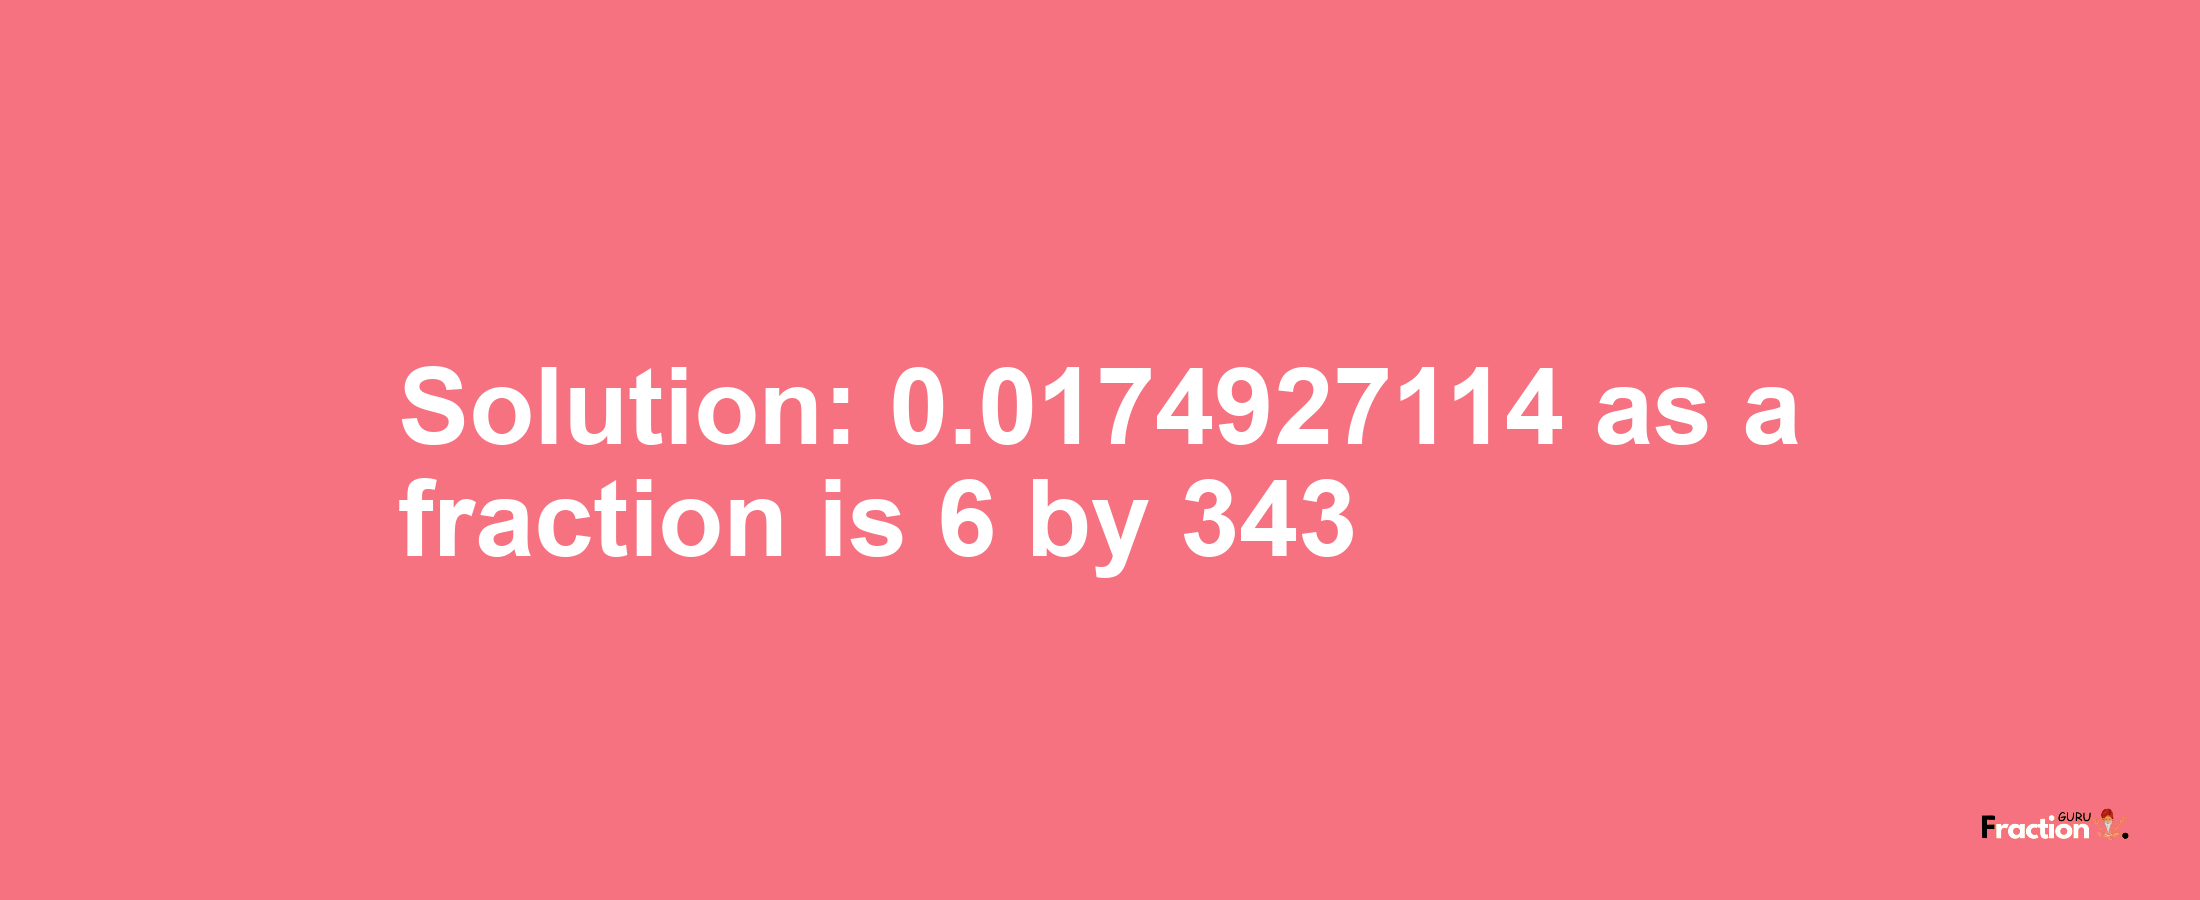 Solution:0.0174927114 as a fraction is 6/343